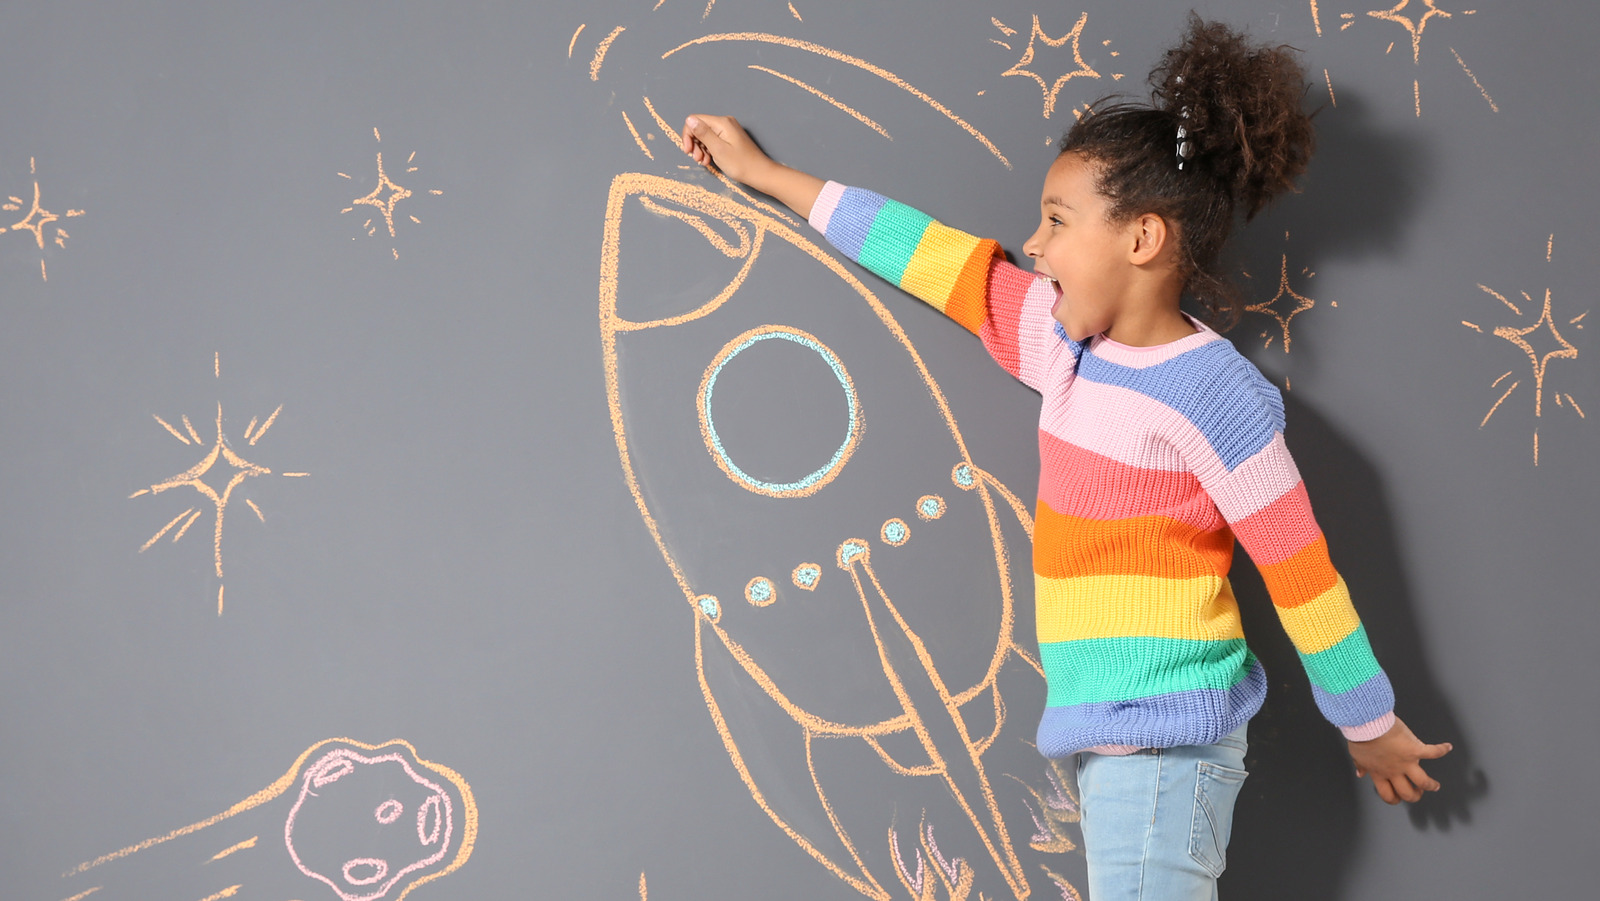 How to Paint Using Chalkboard Paint